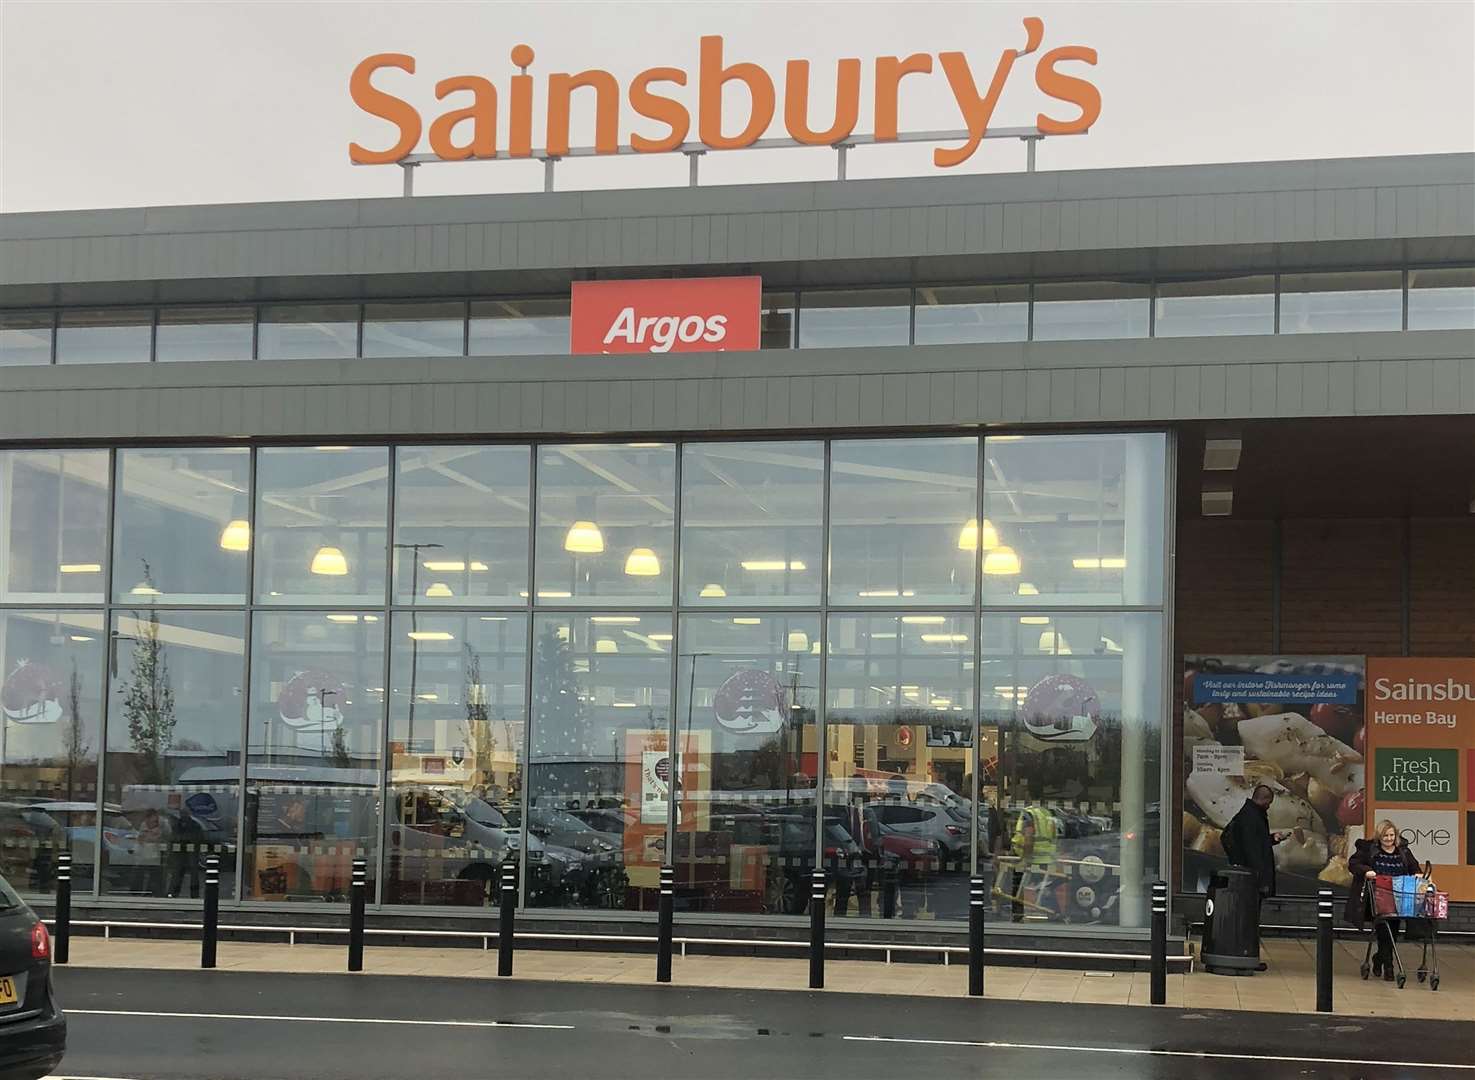 The Sainsbury's at Altira Business Park in Broomfield, Herne Bay